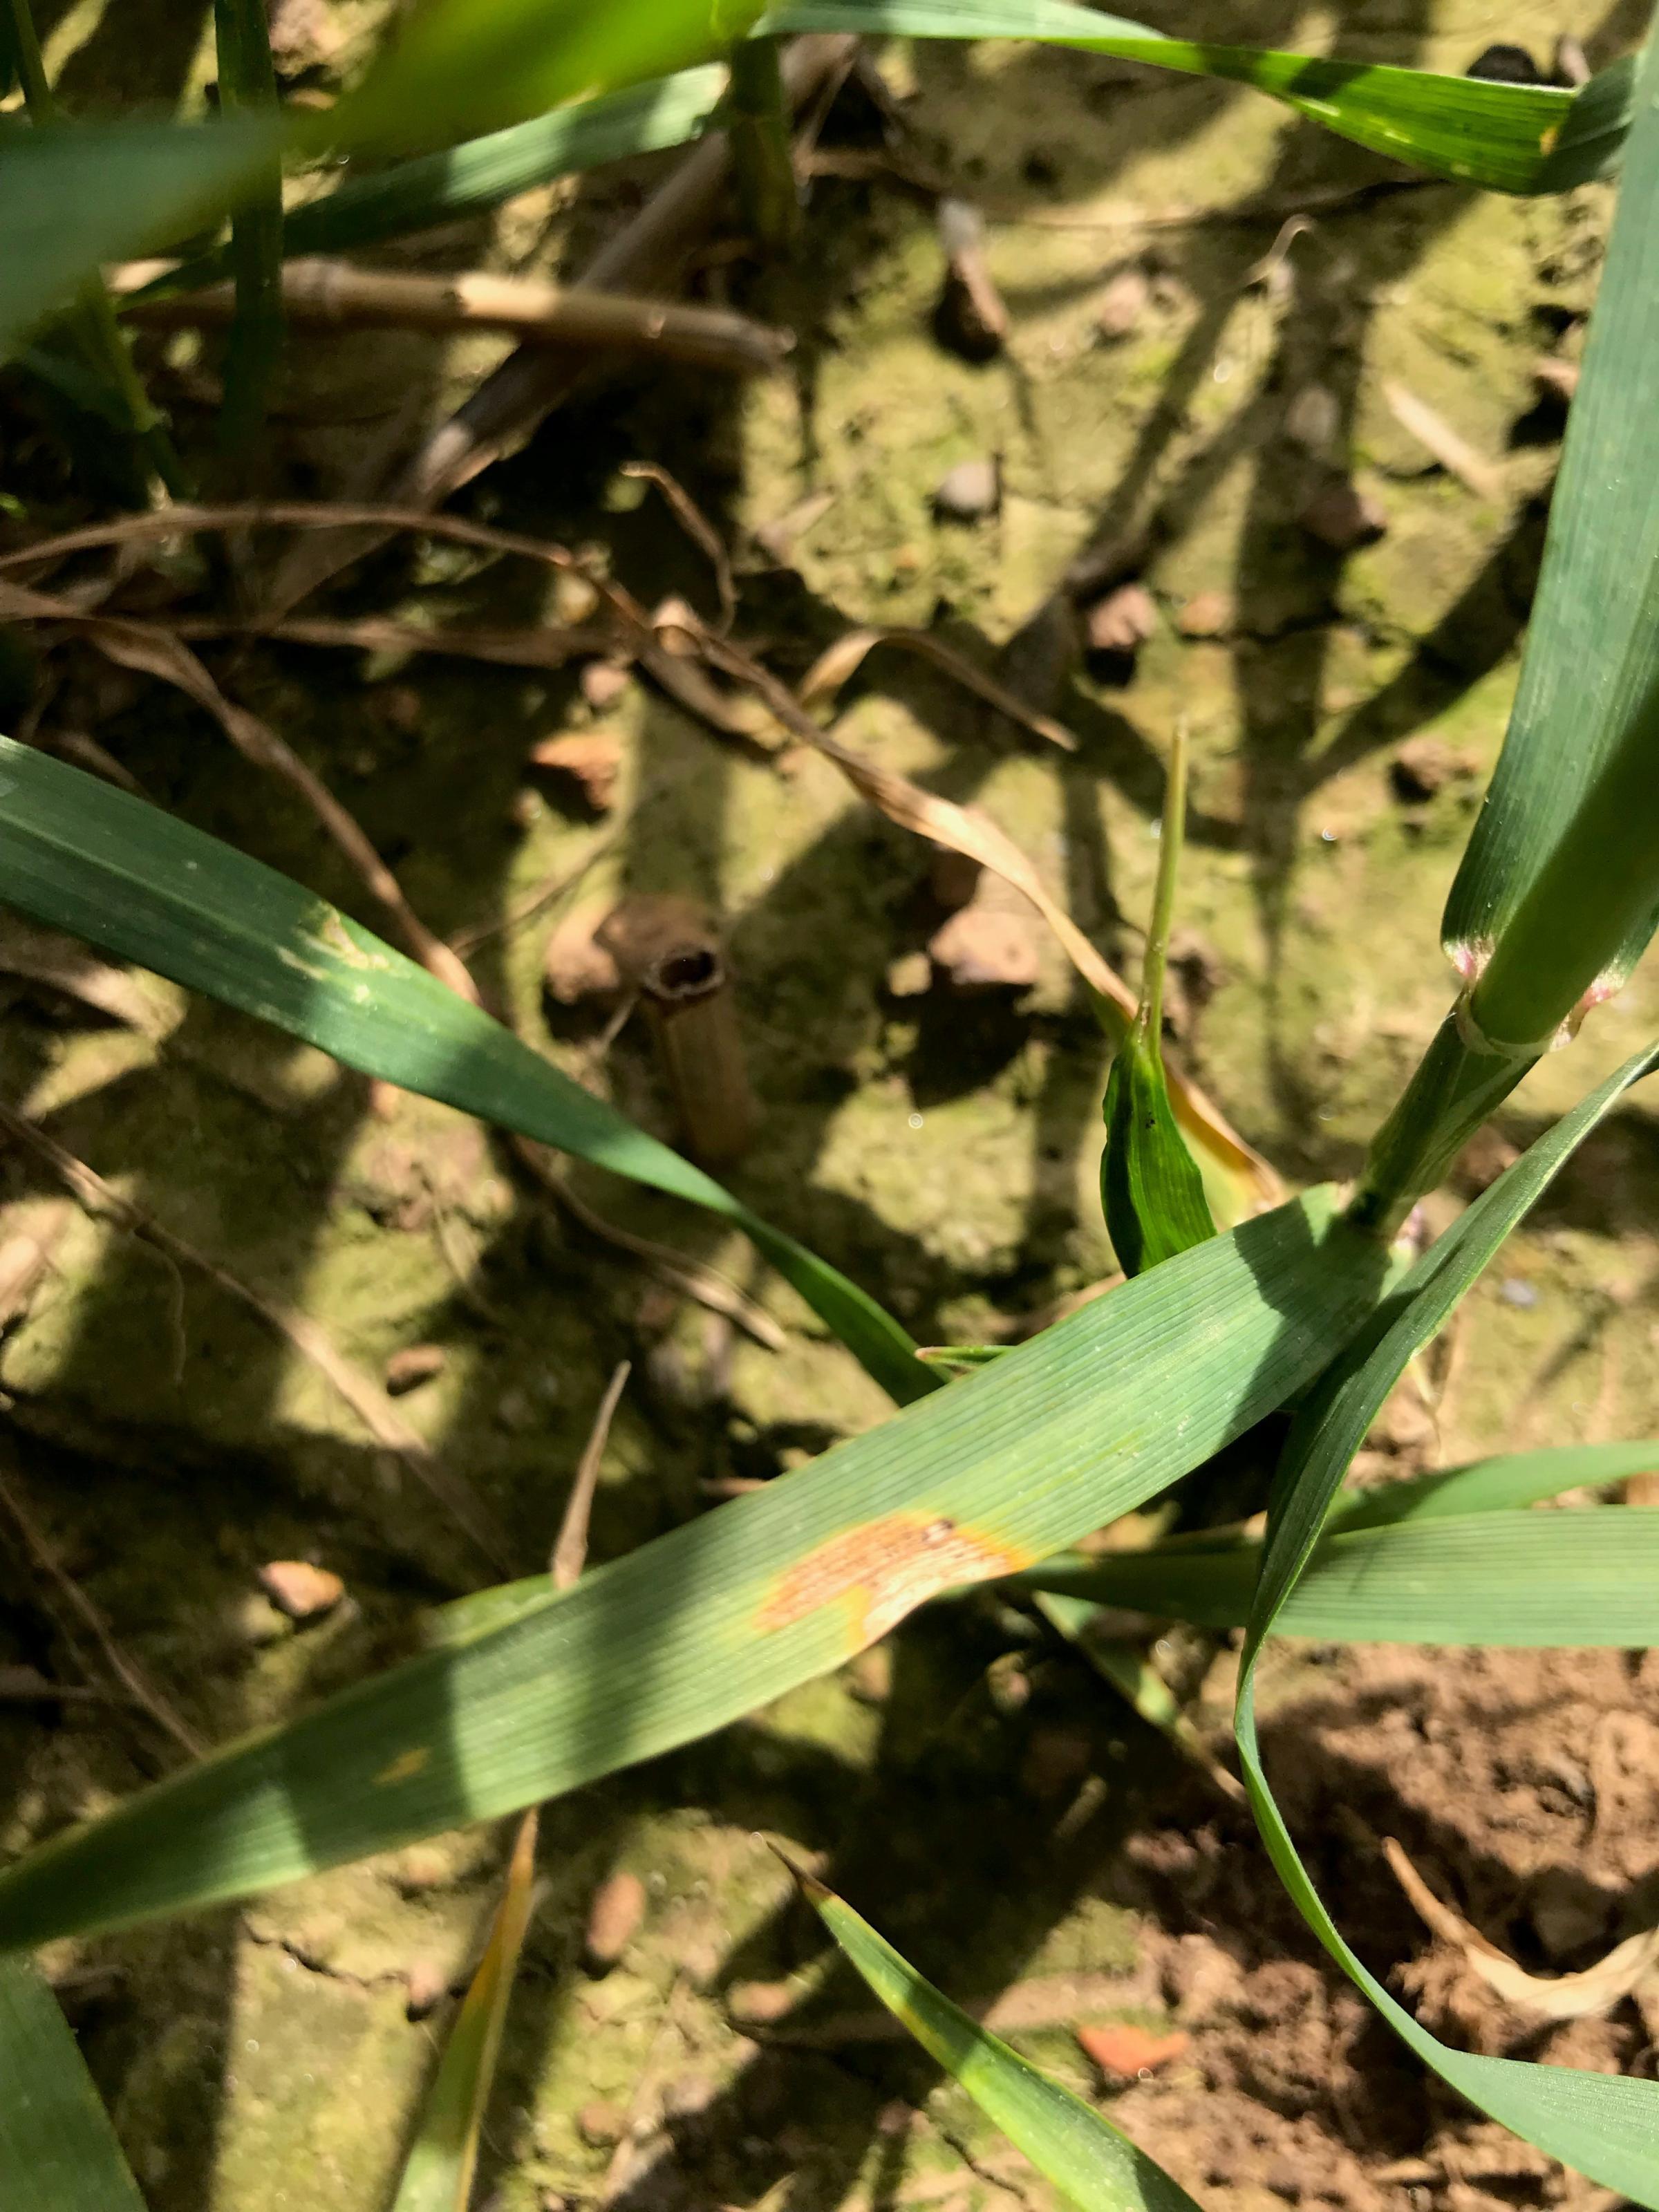 Septoria is now beginning to show up on the lower leaves of Skyscraper in the Lothians